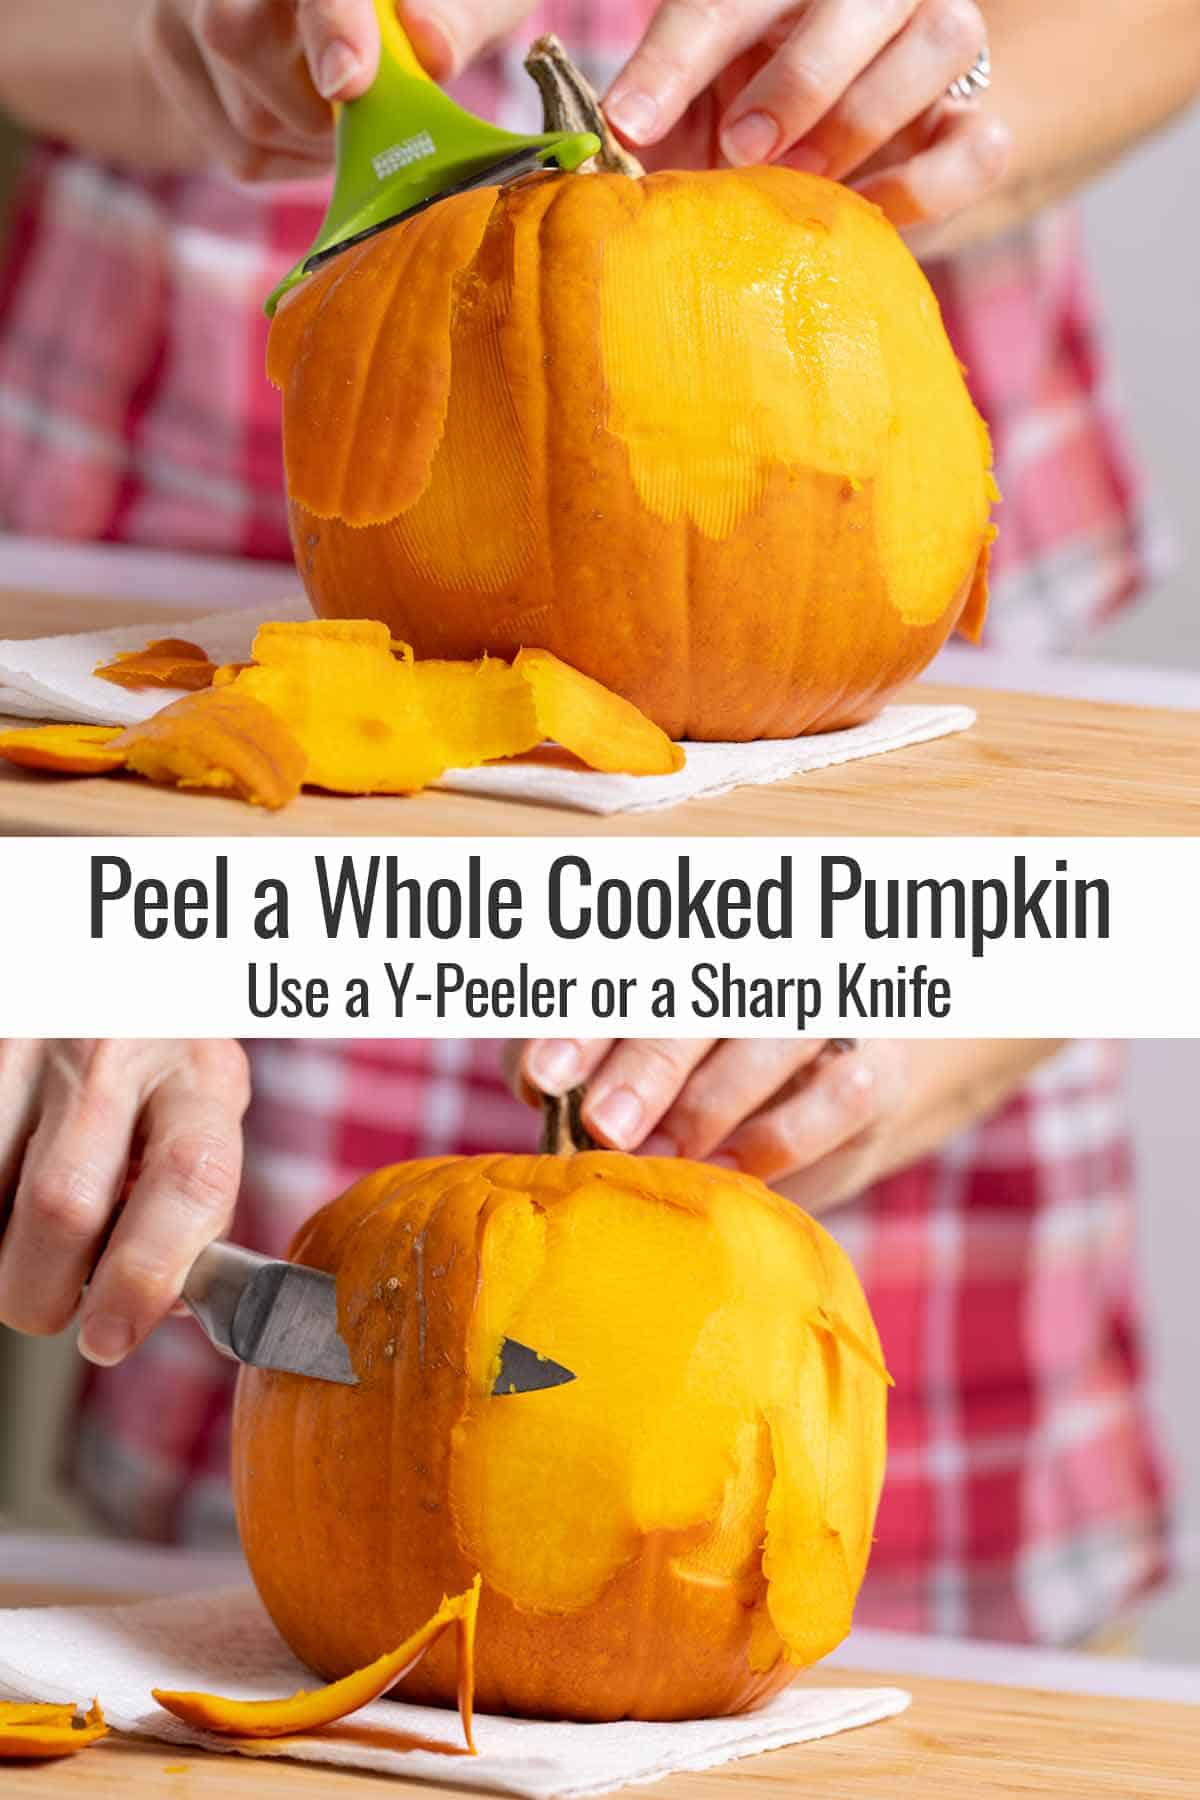 Peeling a whole cooked pumpkin with a y-peeler or a sharp knife.